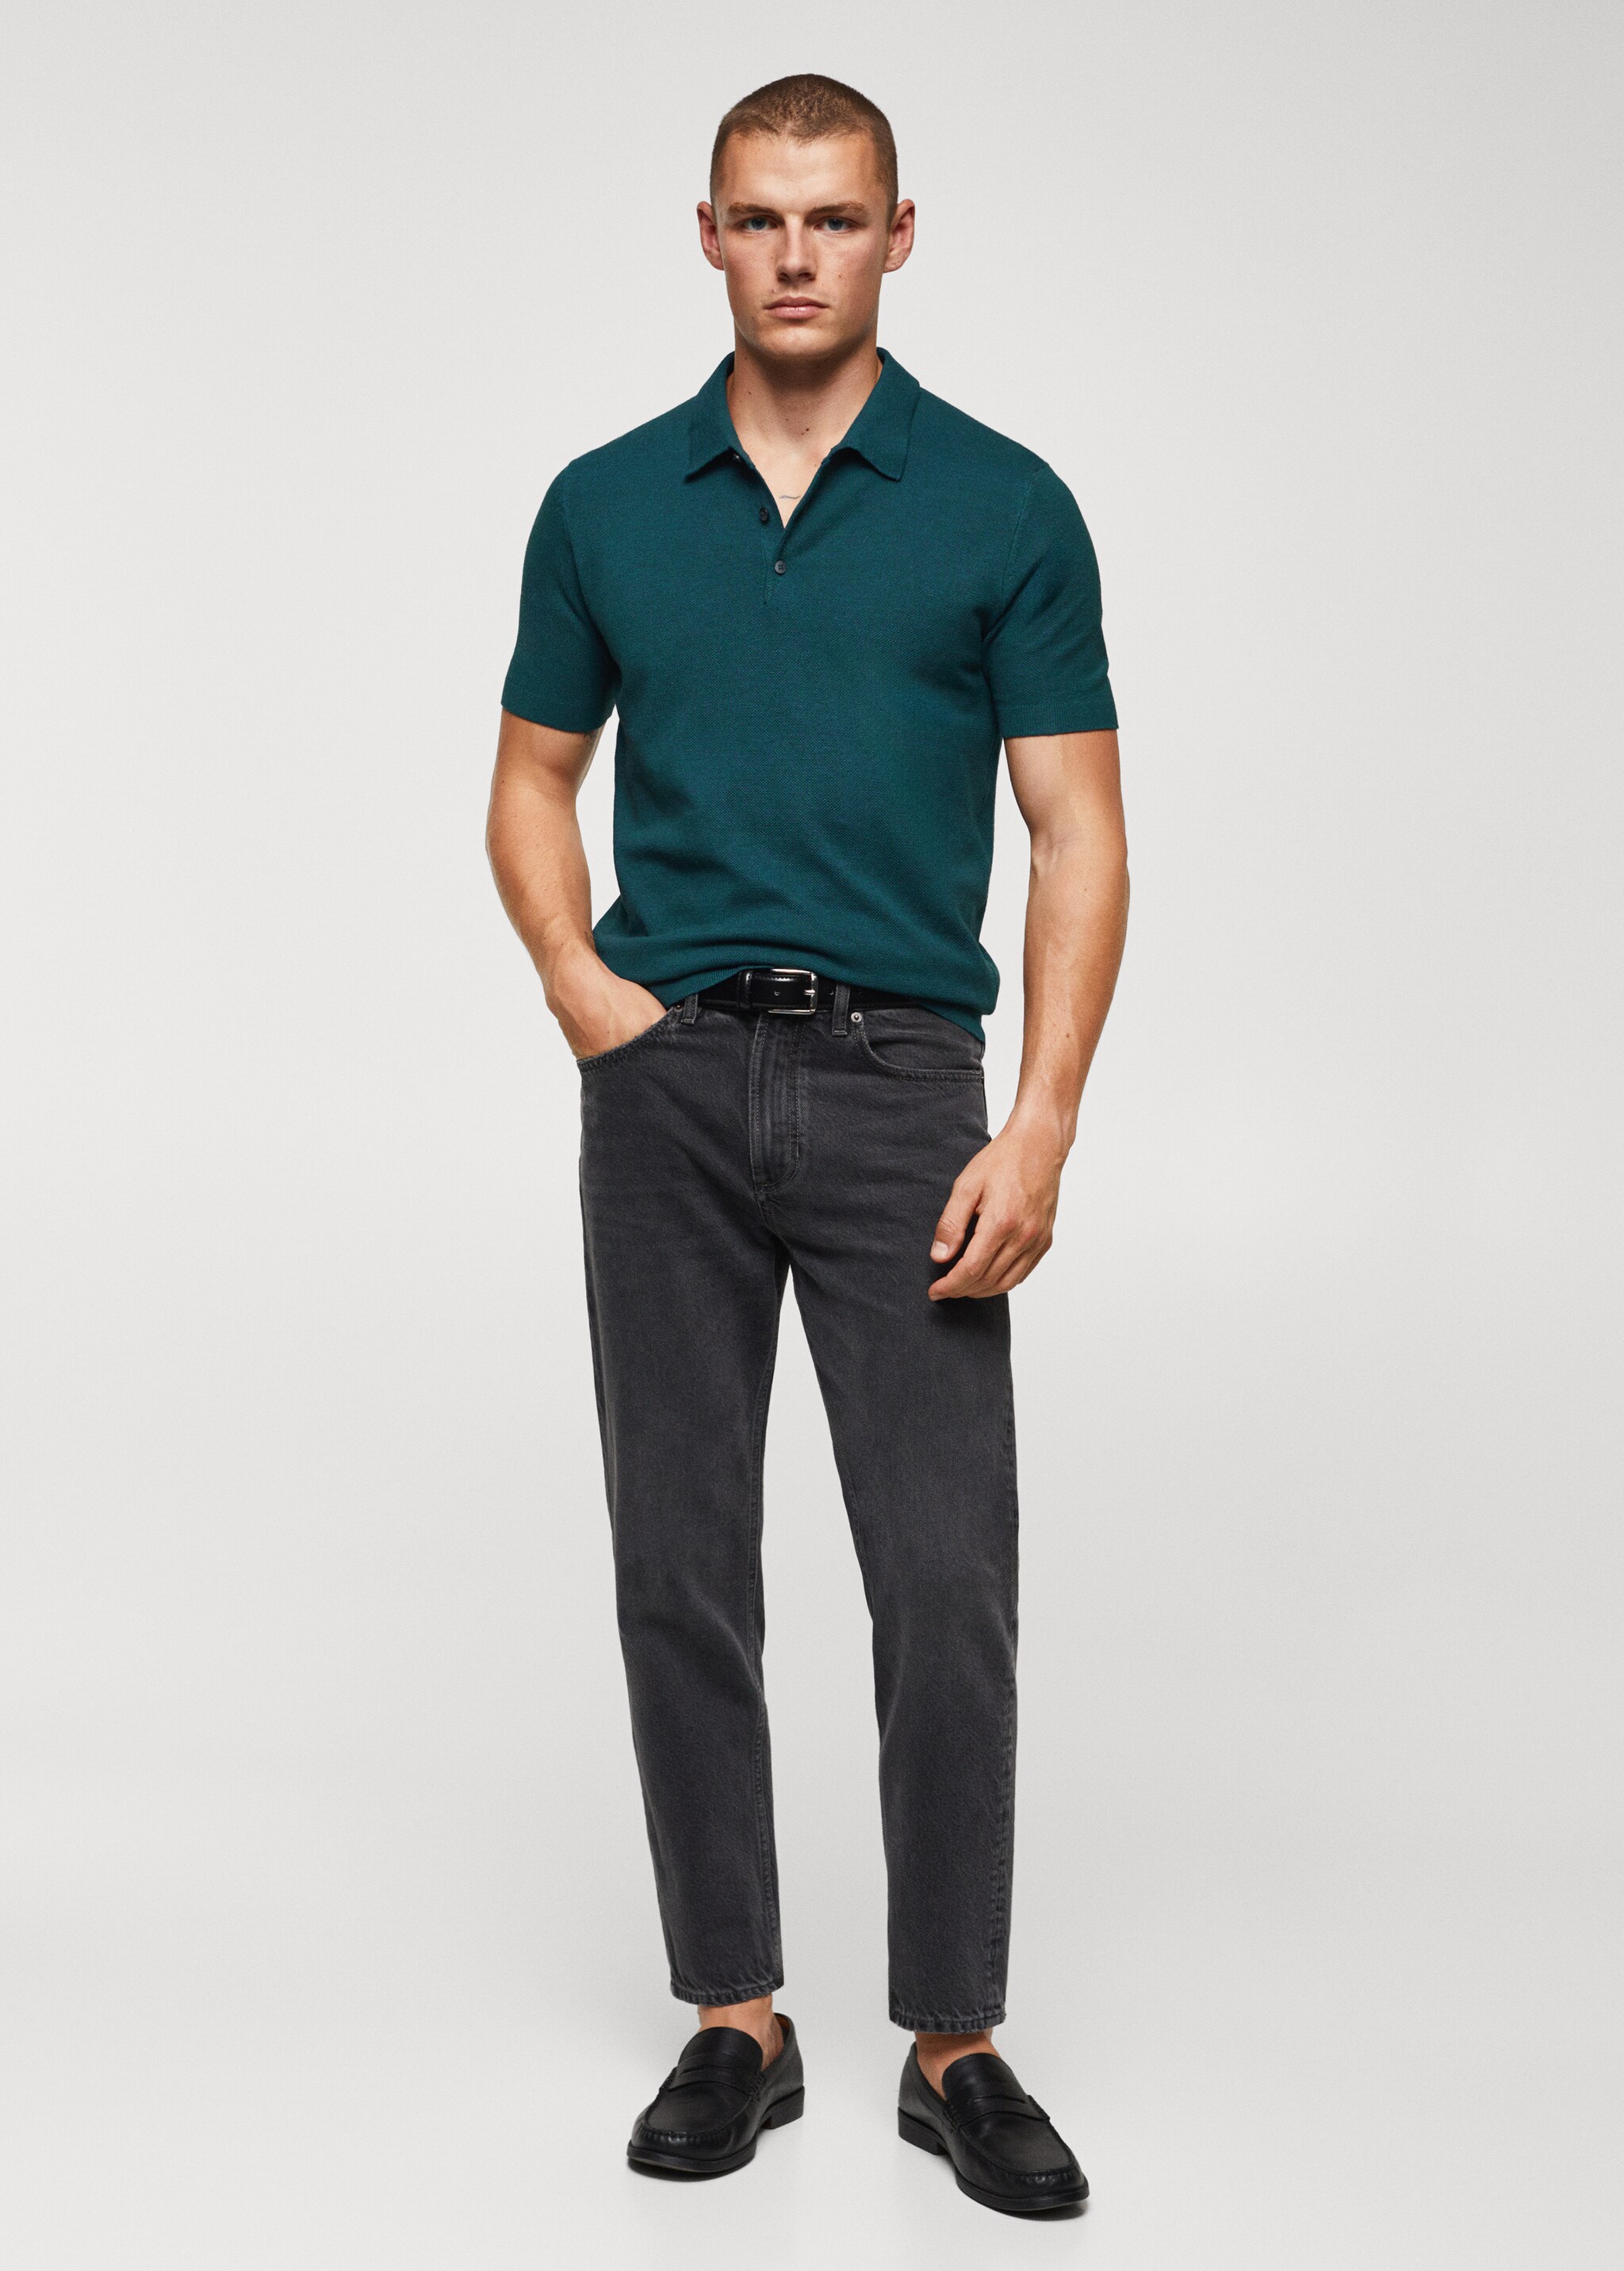 Structured knit cotton polo - General plane